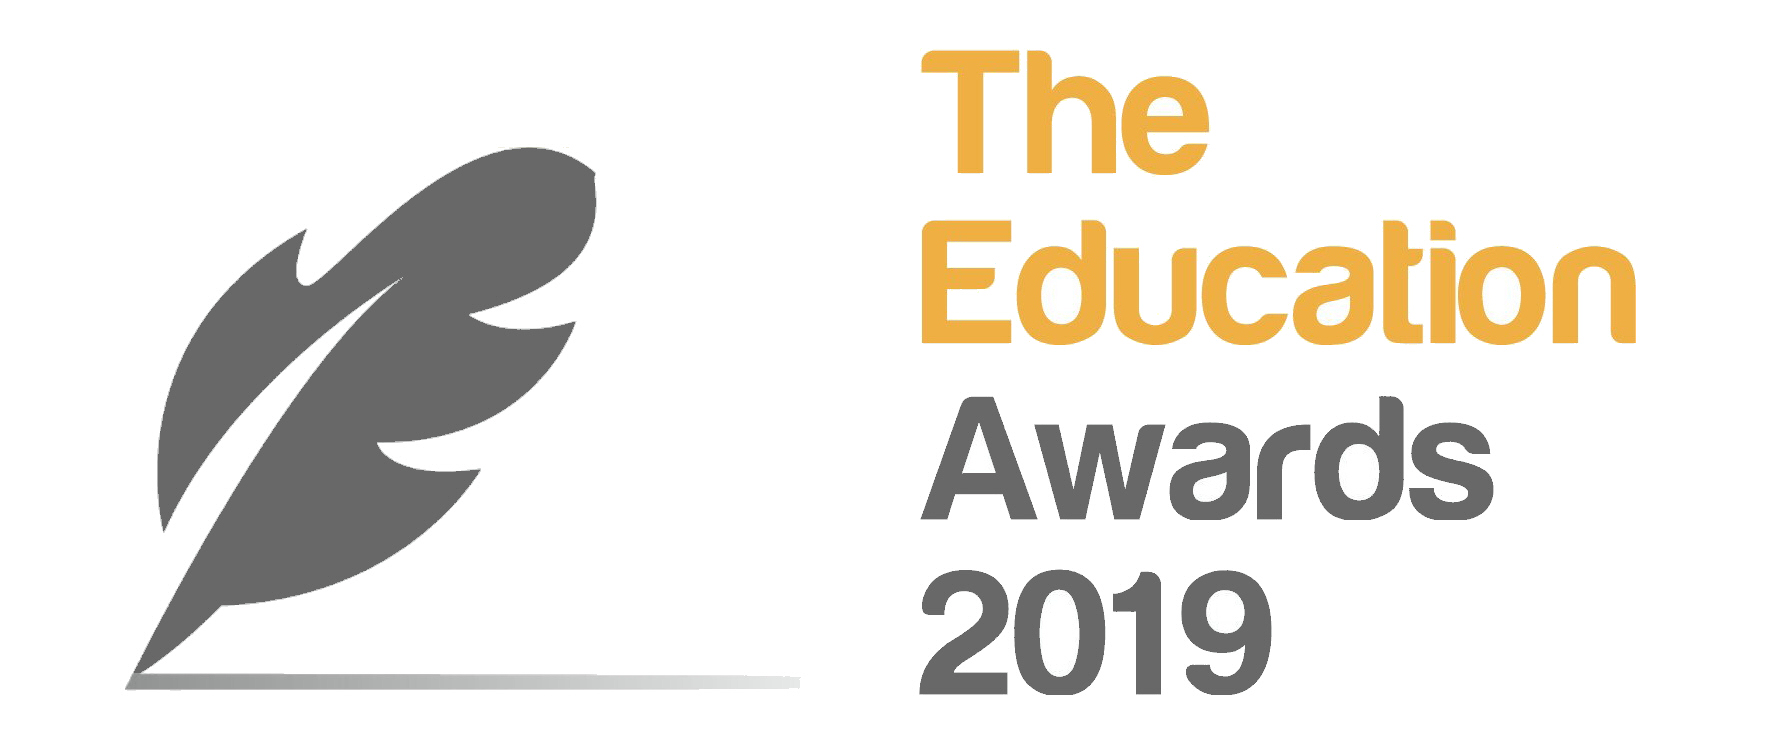 UCC shortlisted in Five Categories at The Education Awards 2019